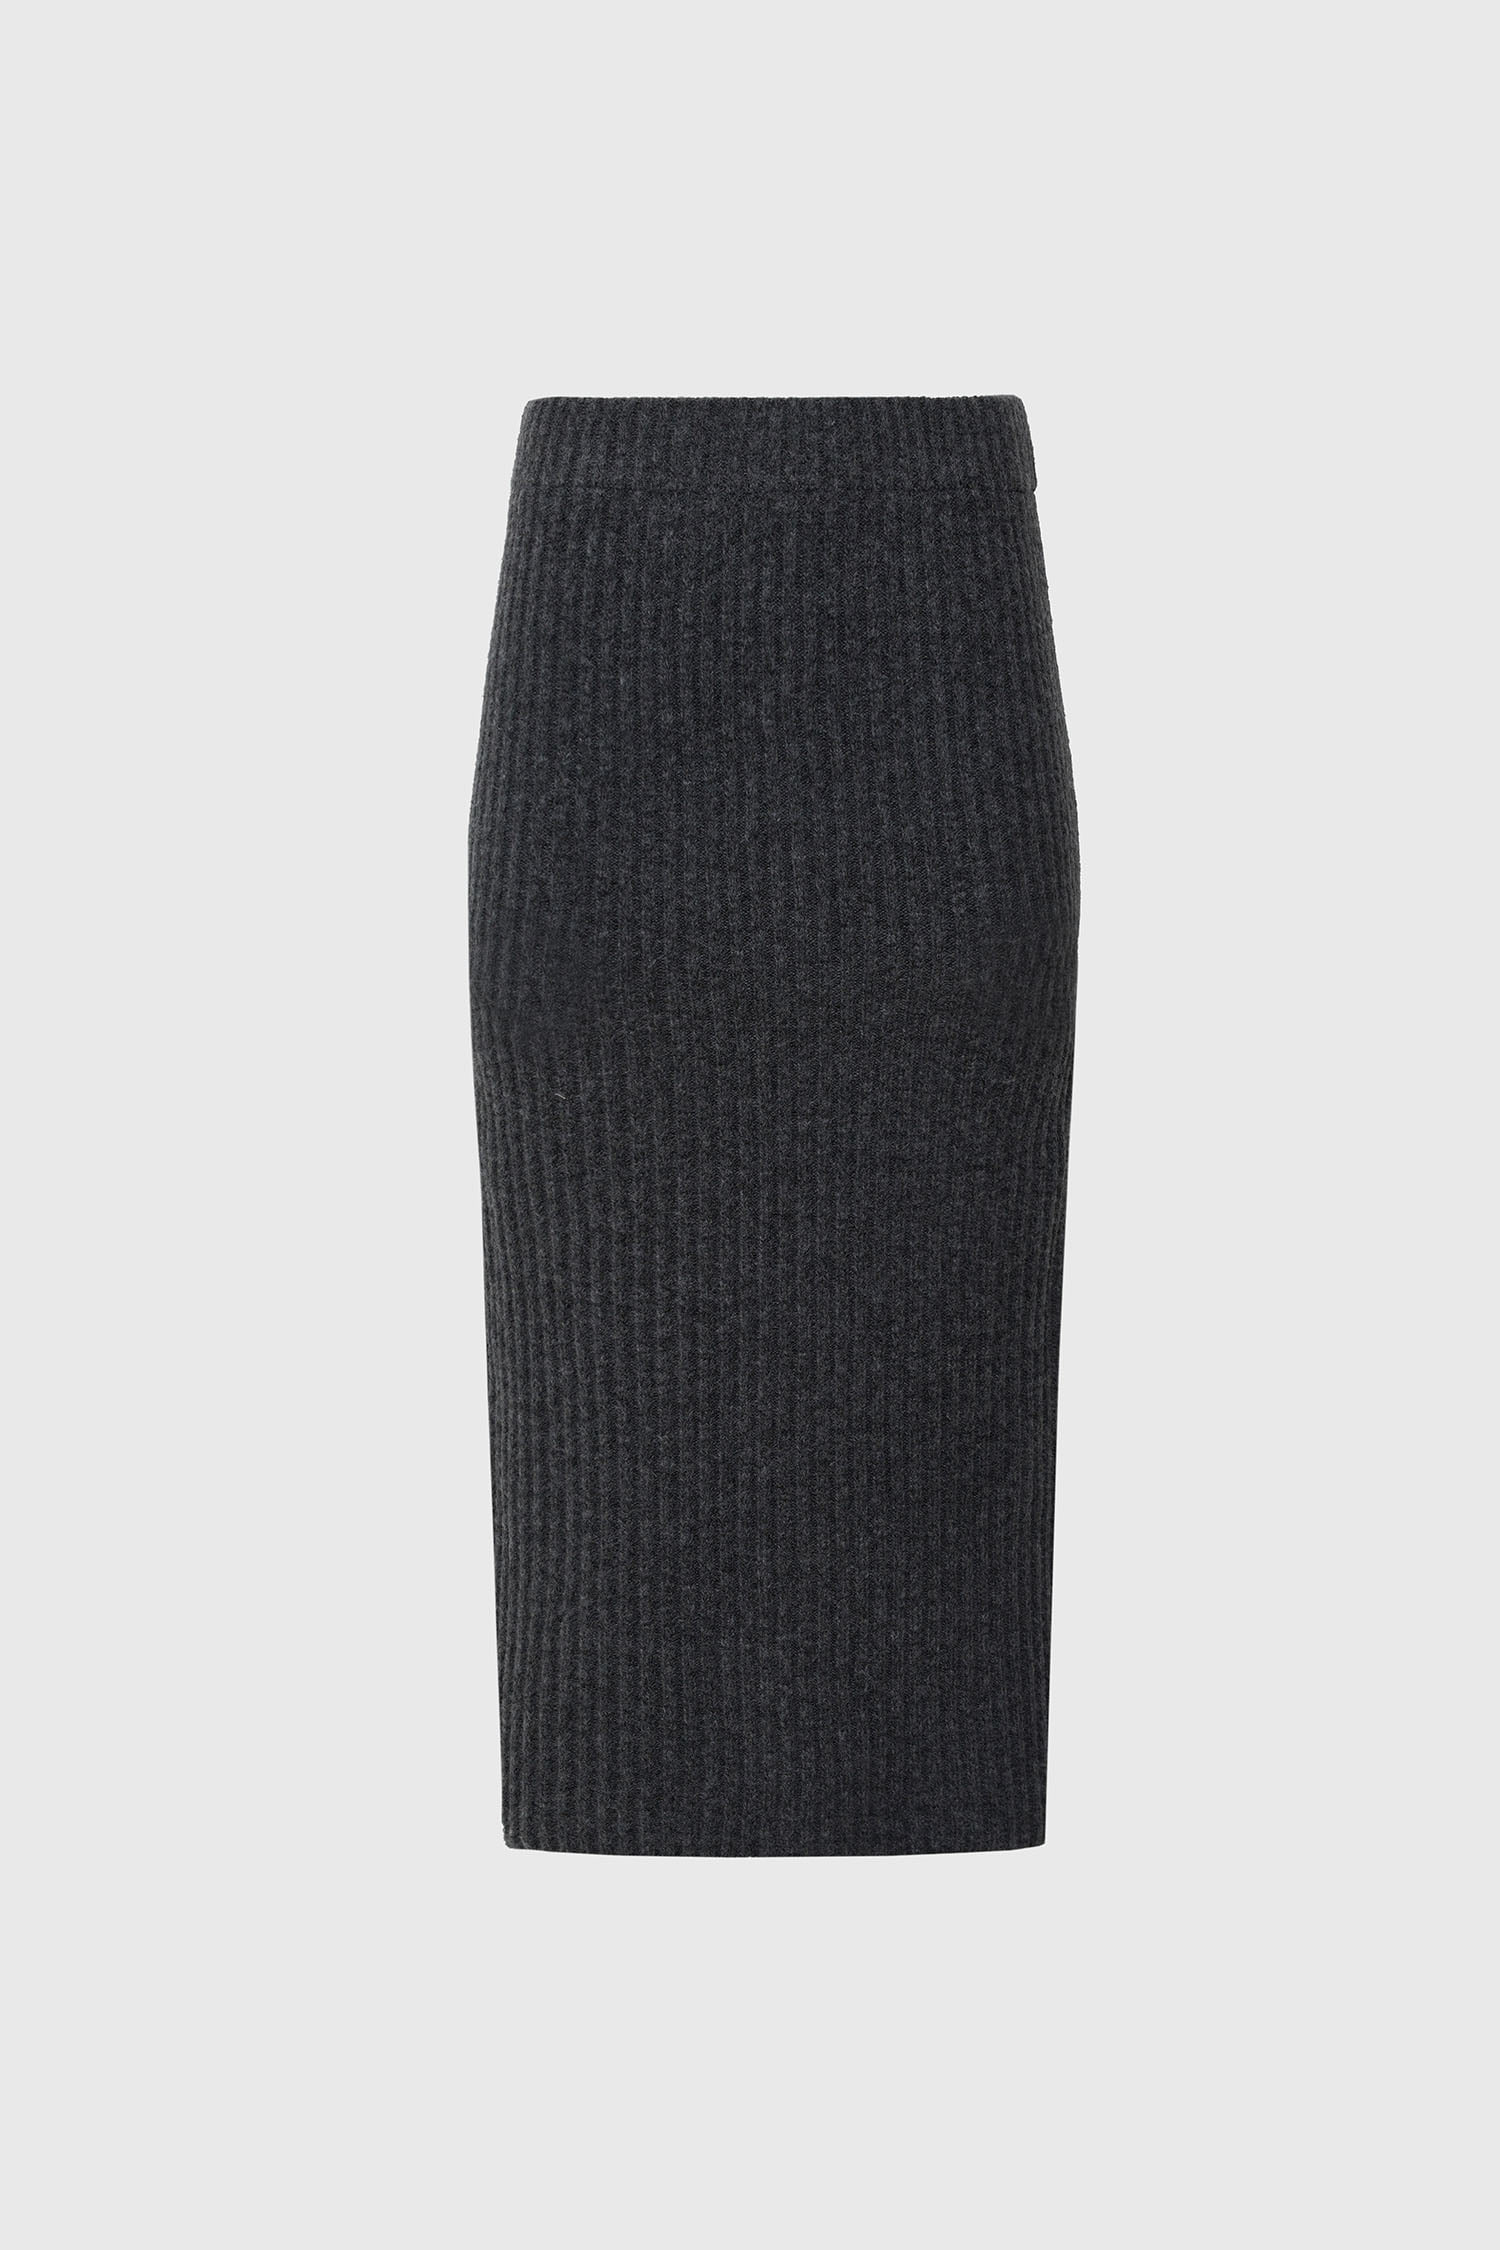 Warmth wrinkle knit skirt - gray